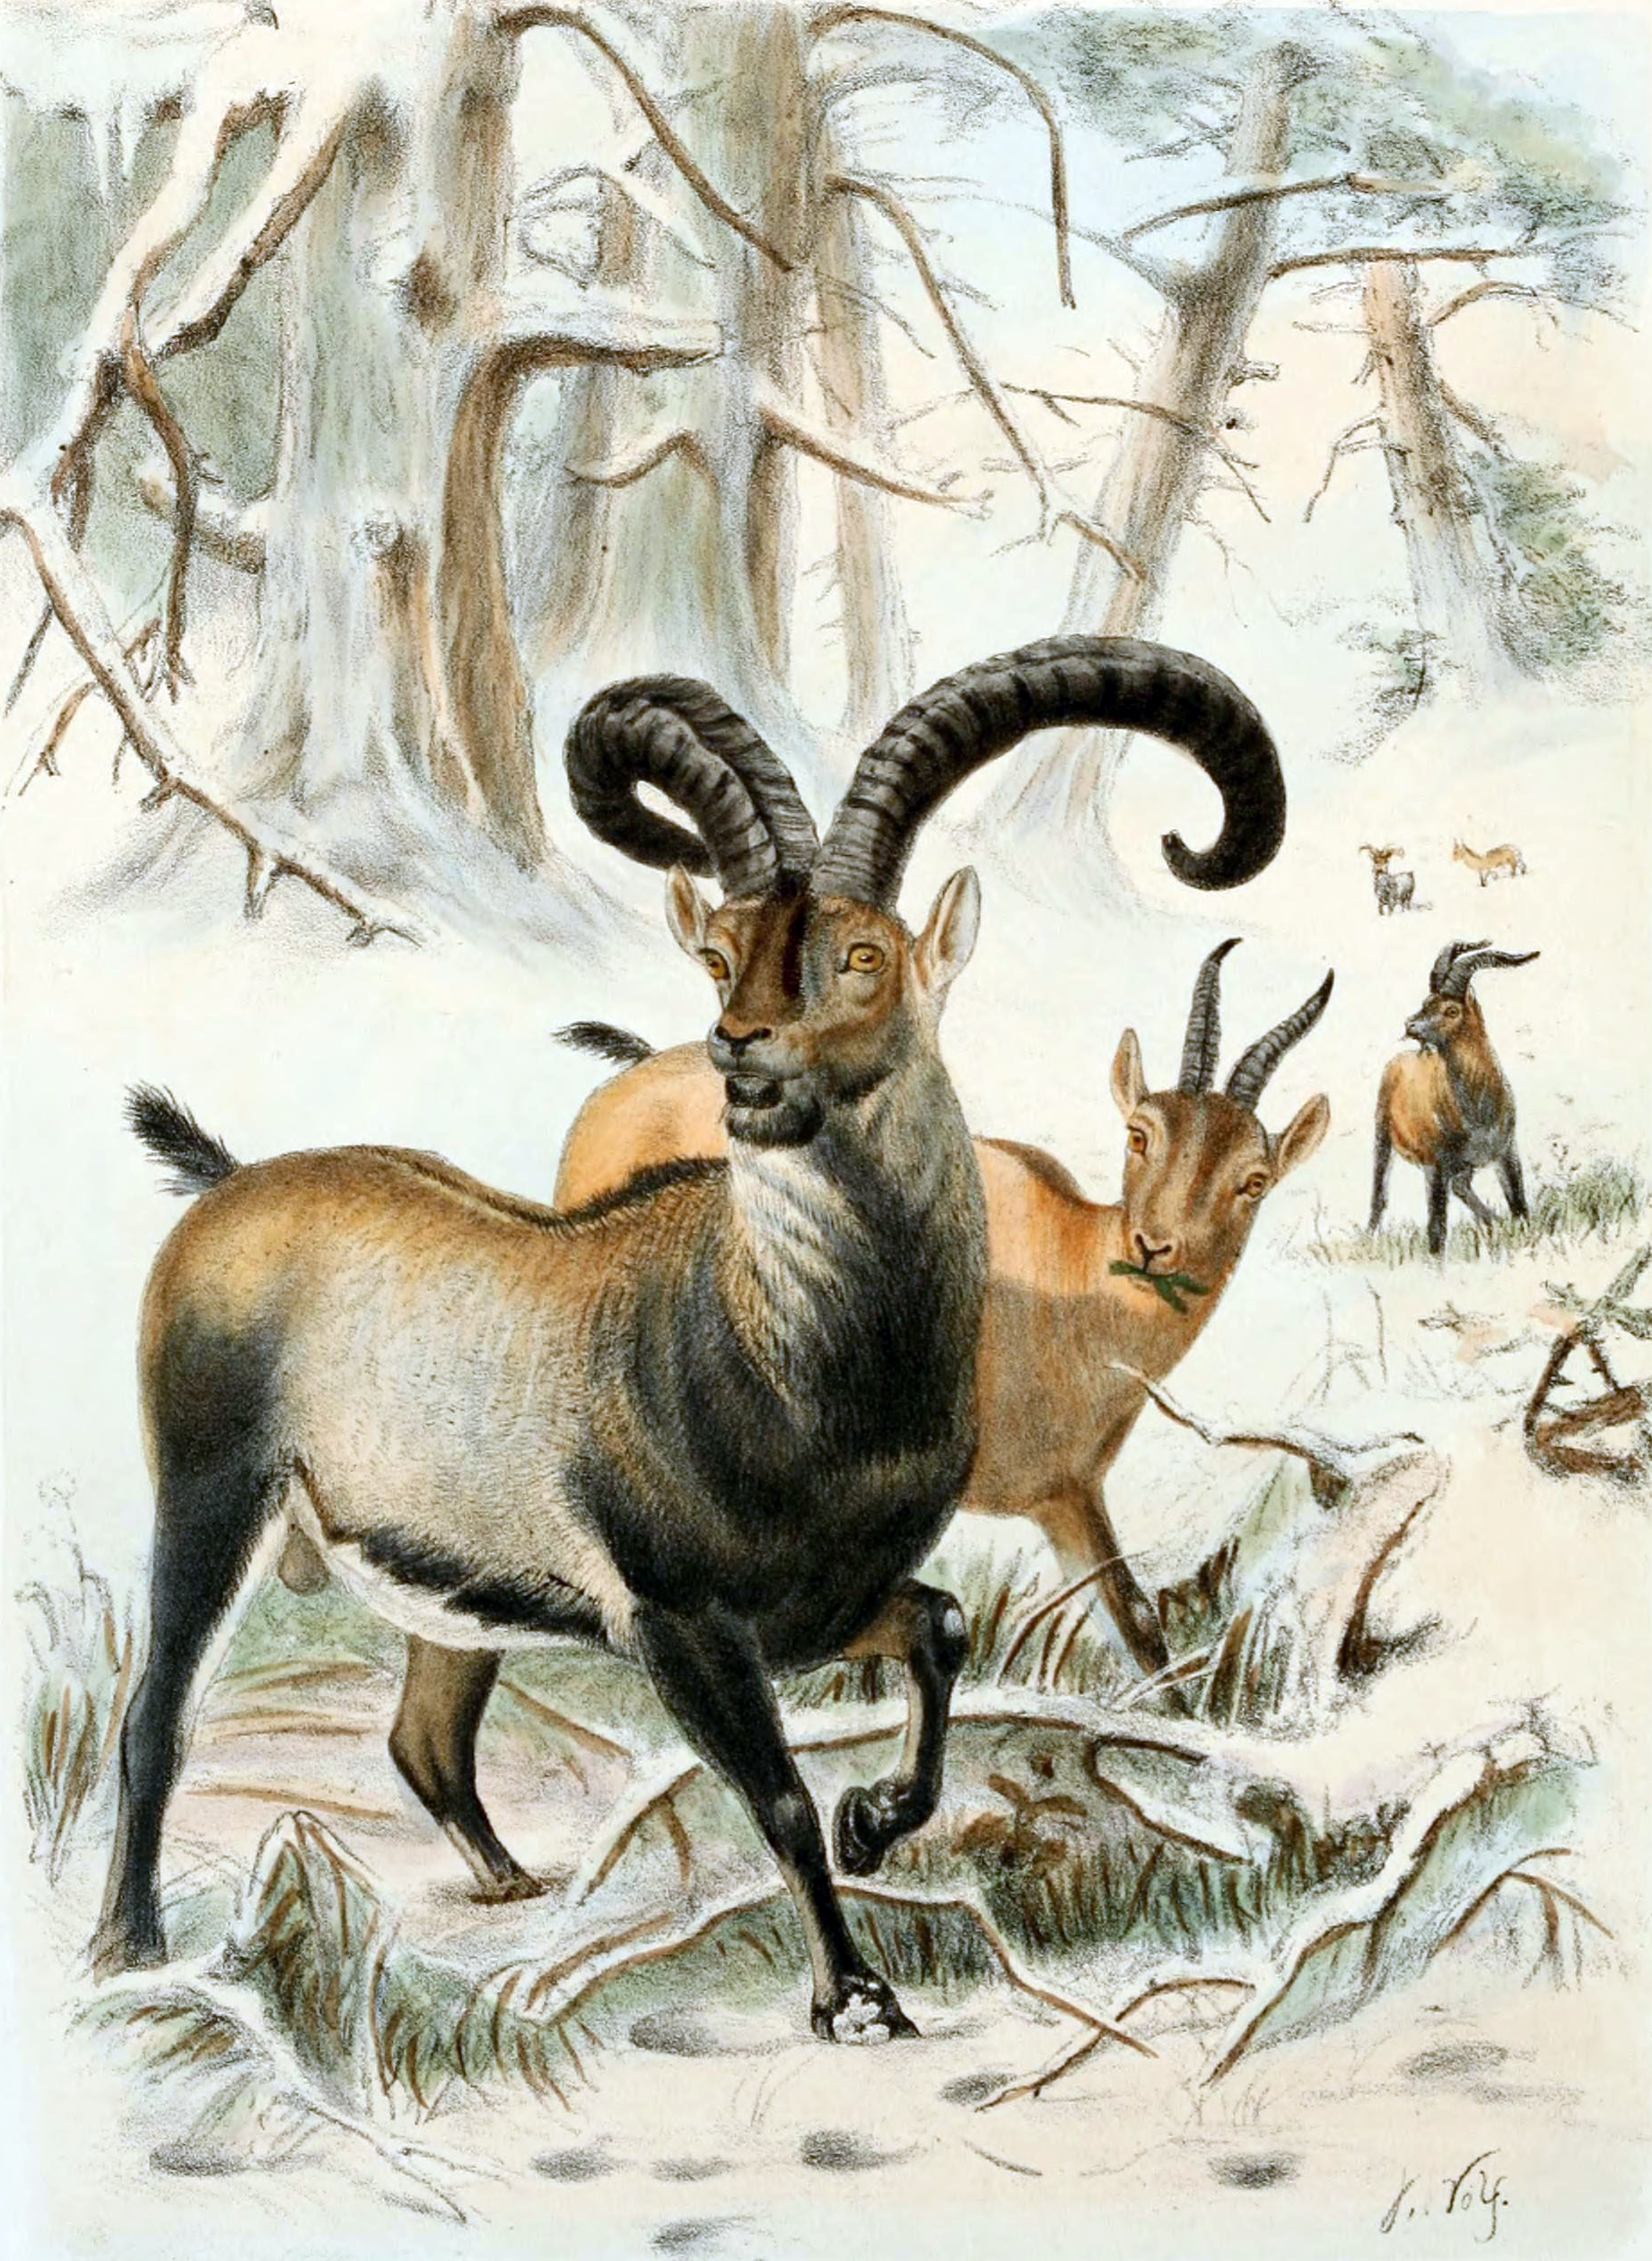 Pyrenean ibex 'Capra pyrenaica pyrenaica,' the male with large curved horns, a brown back, tan sides, and black legs, forhead, and mane; the female brown with smaller straighter horns; illustration from the book 'Wild oxen, sheep & goats of all lands, living and extinct' (1898) by Richard Lydekker. From a sketch by Joseph Wolf.